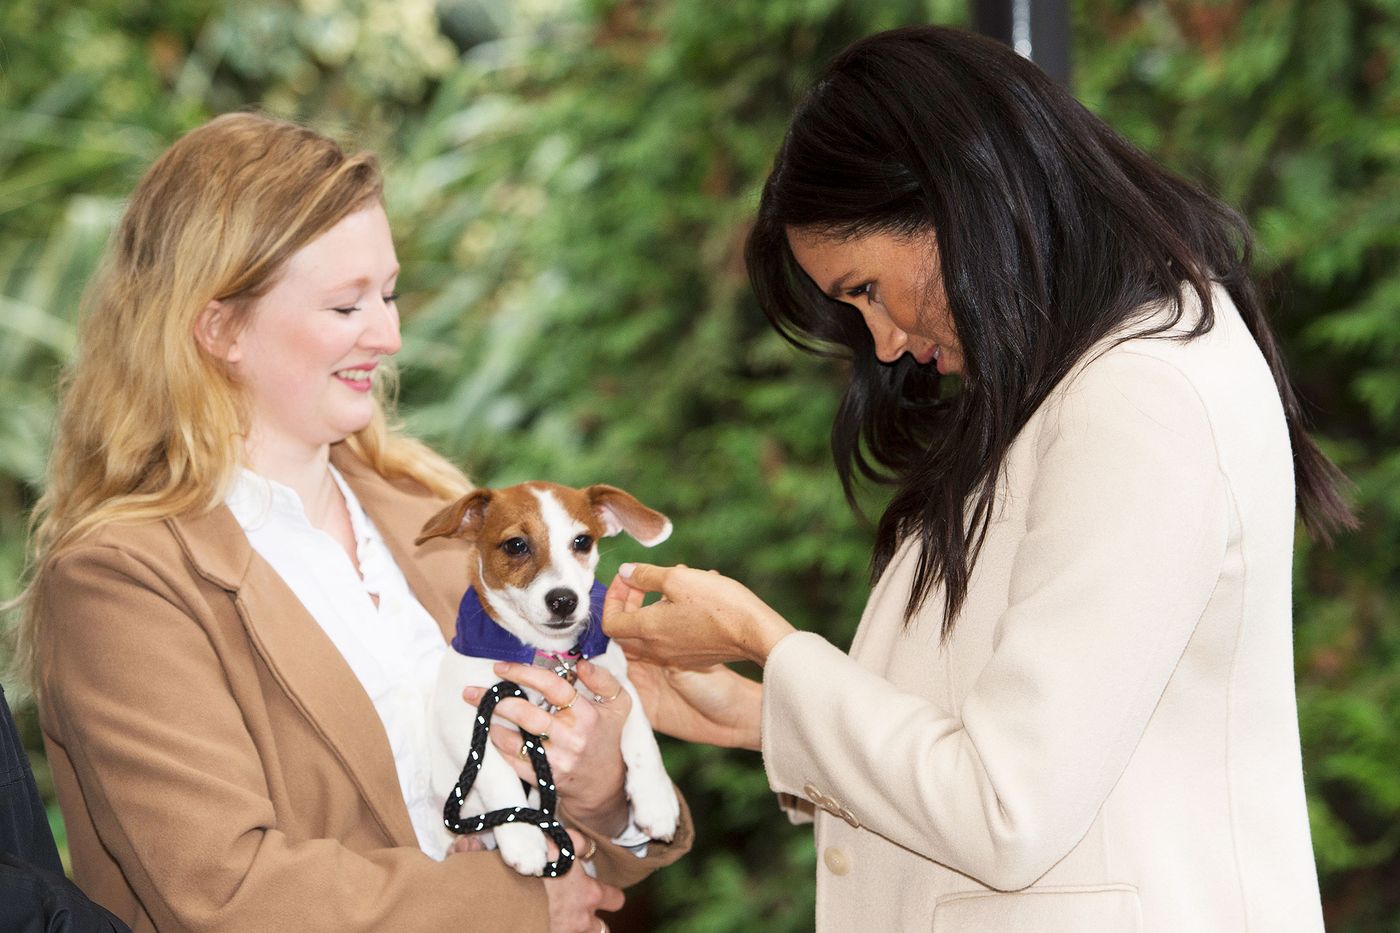 Meghan Markle's dog: You can donate to Guy's animal shelter